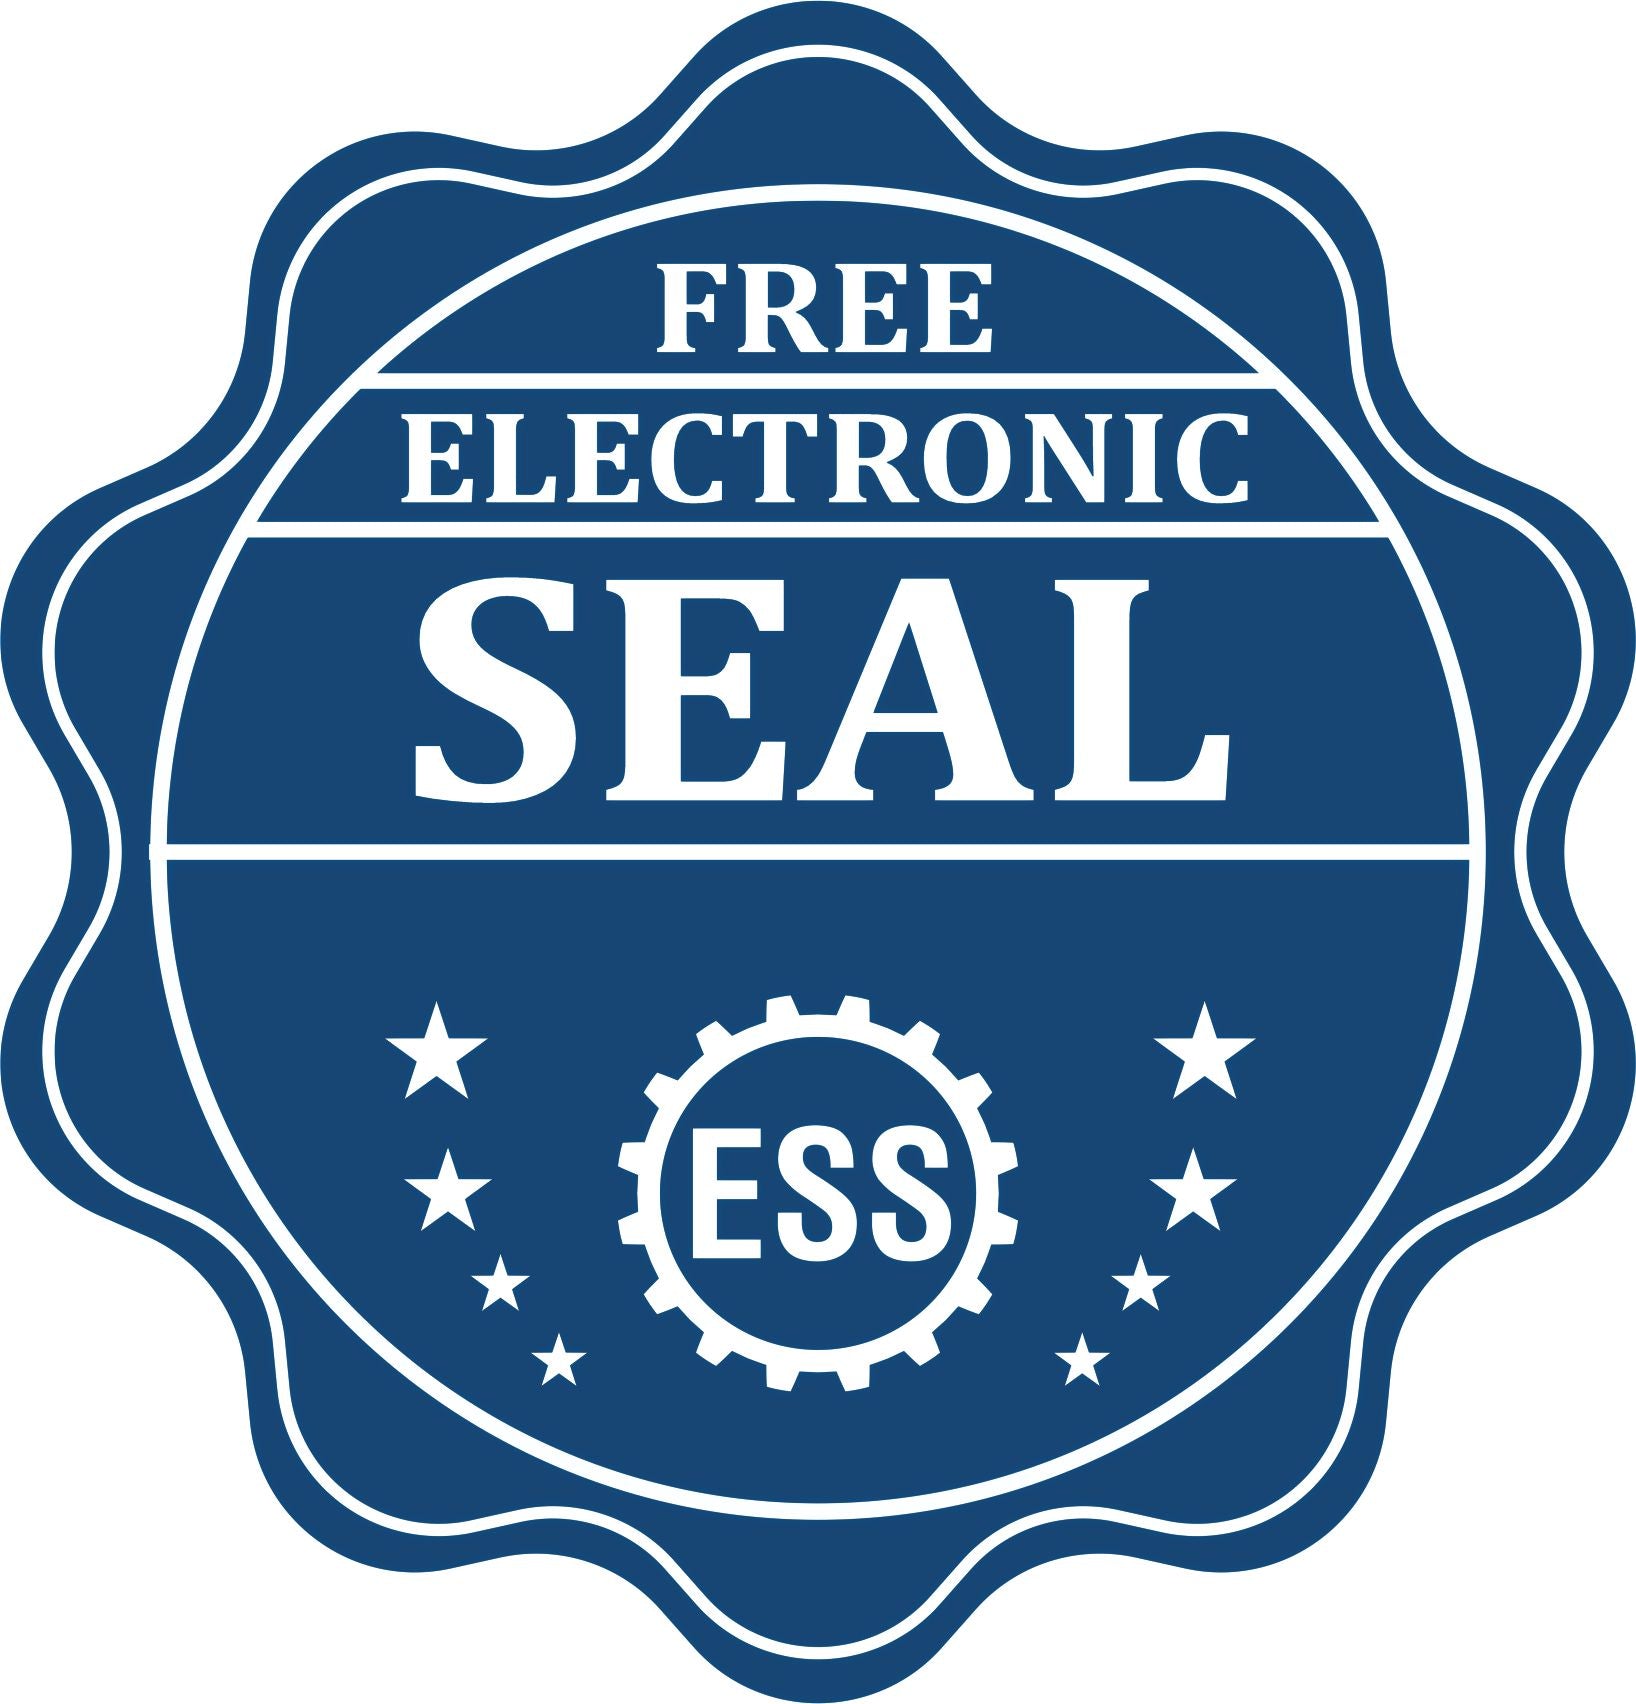 A badge showing a free electronic seal for the Soft North Dakota Professional Geologist Seal with stars and the ESS gear on the emblem.